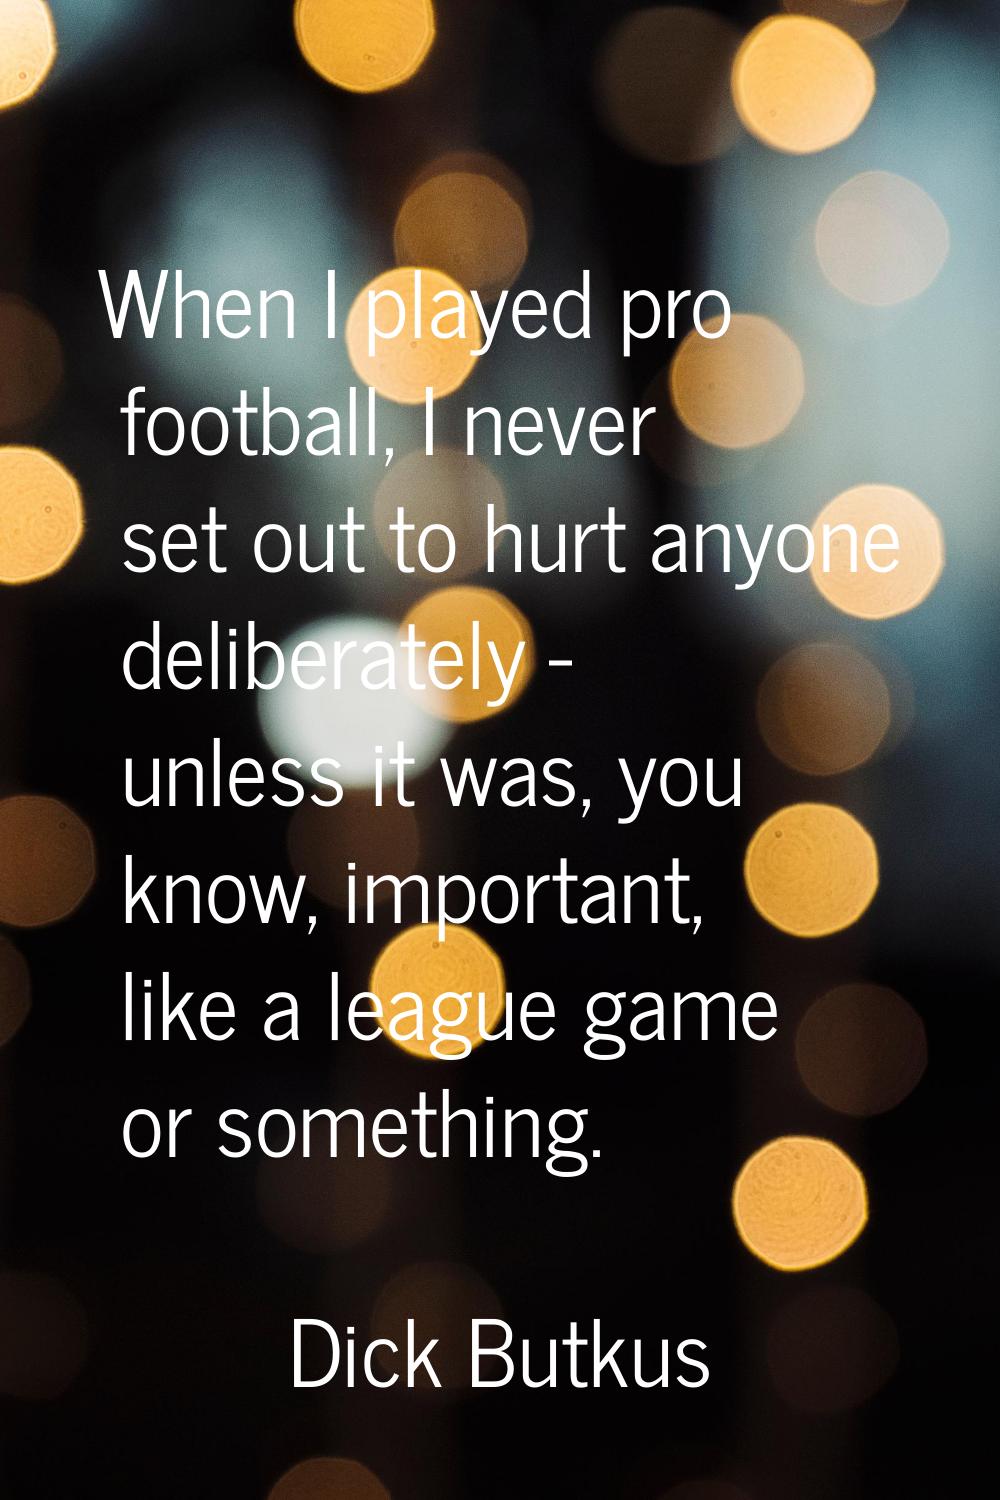 When I played pro football, I never set out to hurt anyone deliberately - unless it was, you know, 